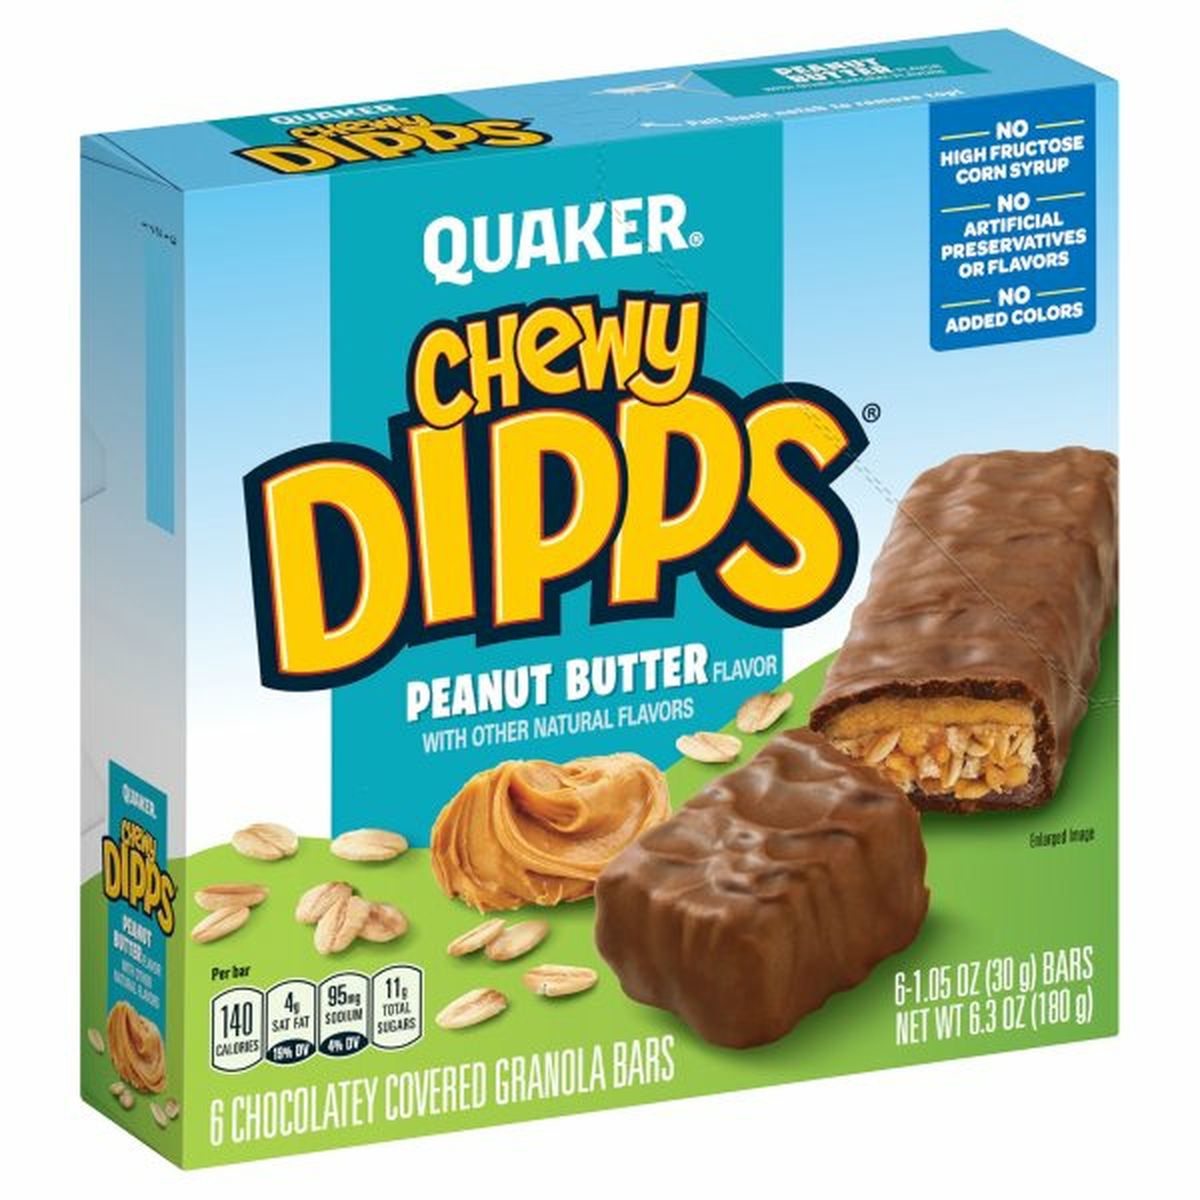 Calories in Quaker Chewy Dipps Granola Bars, Peanut Butter